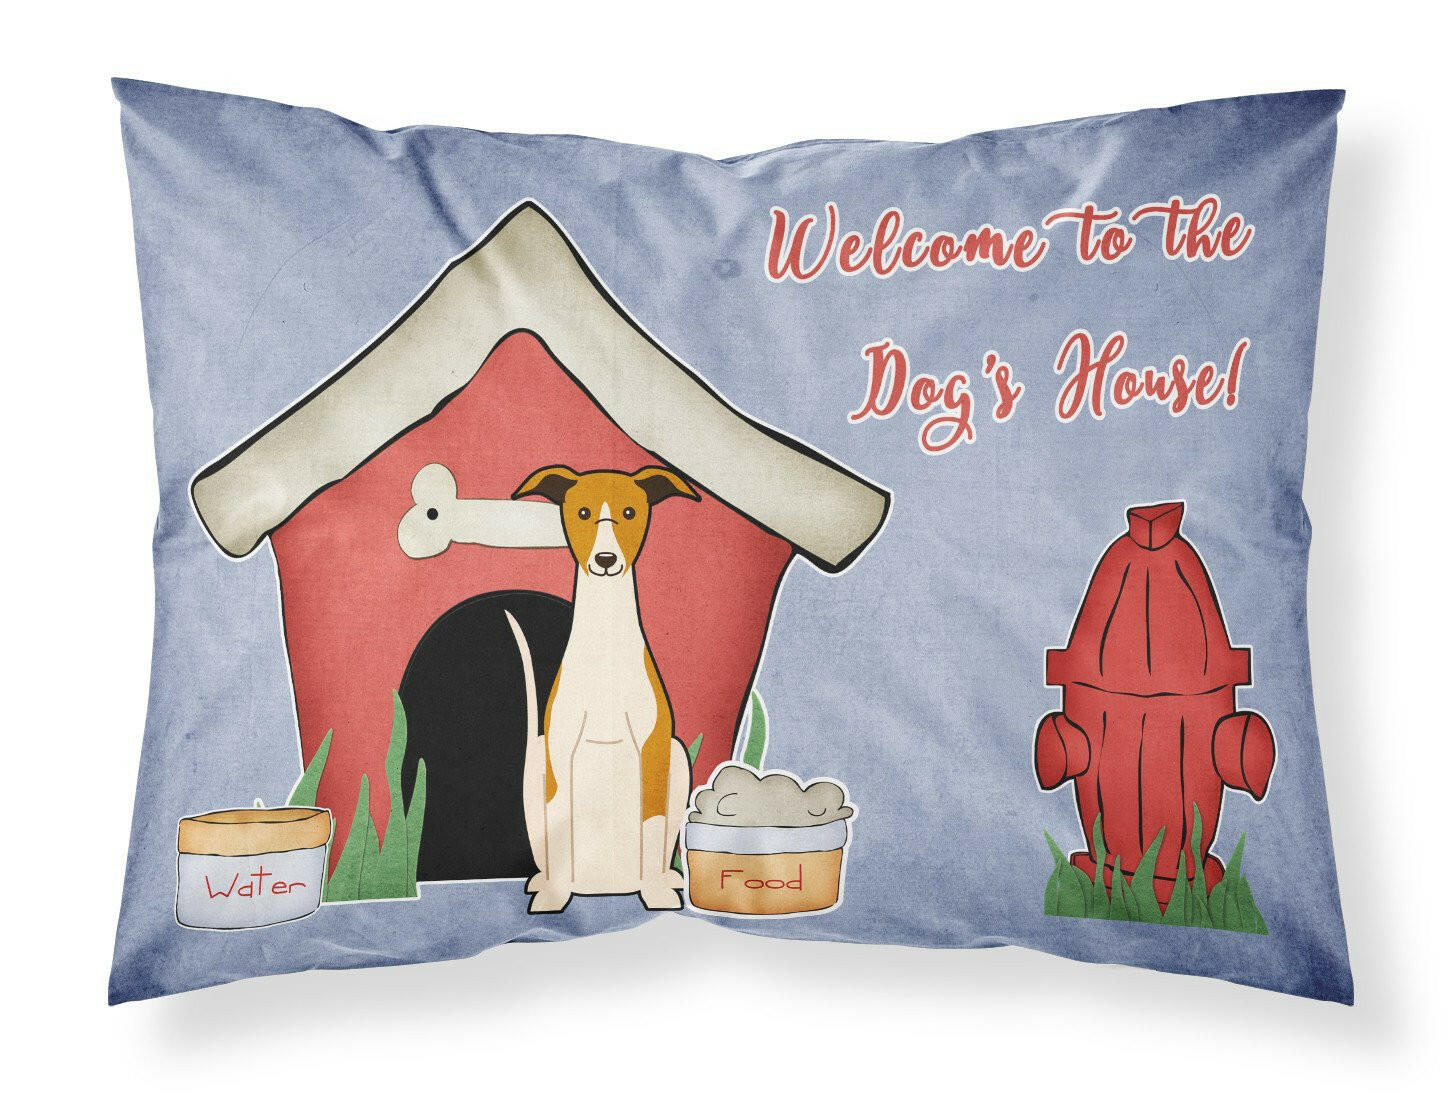 Dog House Collection Whippet Fabric Standard Pillowcase BB2853PILLOWCASE by Caroline's Treasures